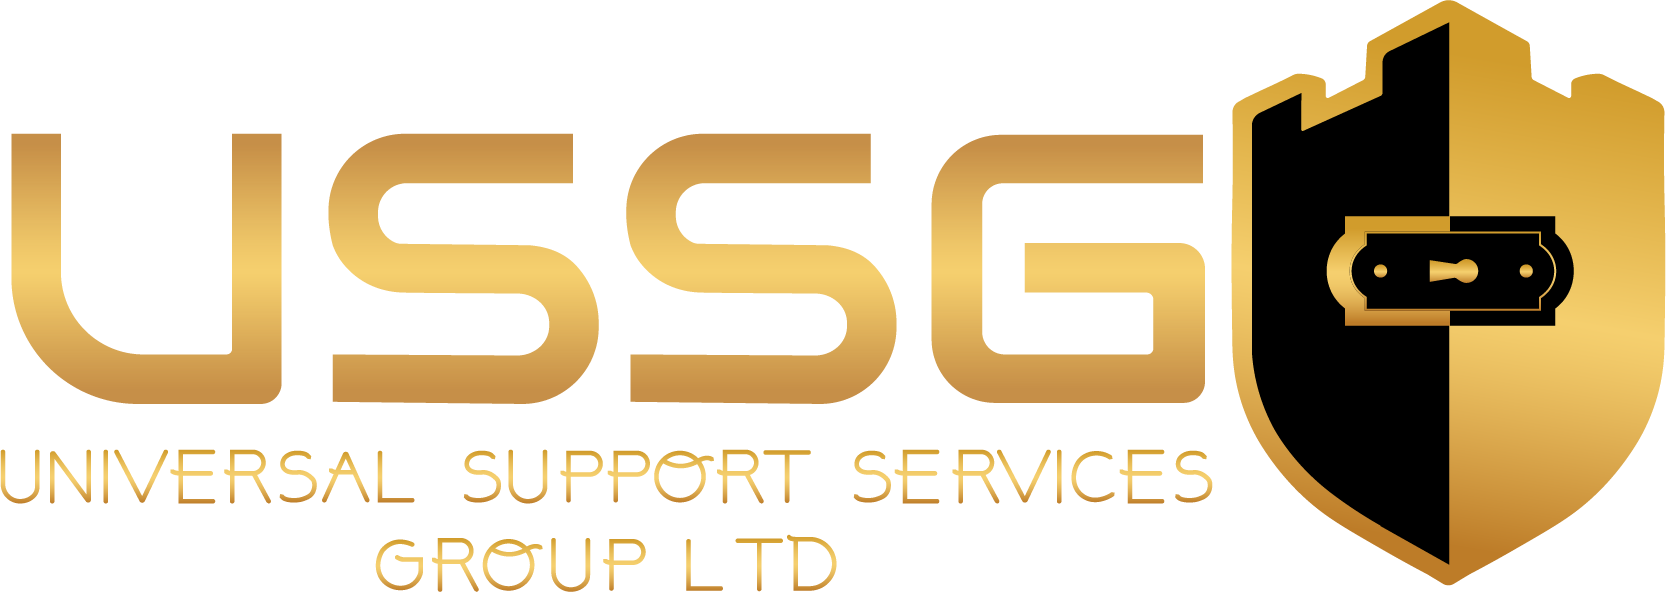 Universal Support Services Group Ltd